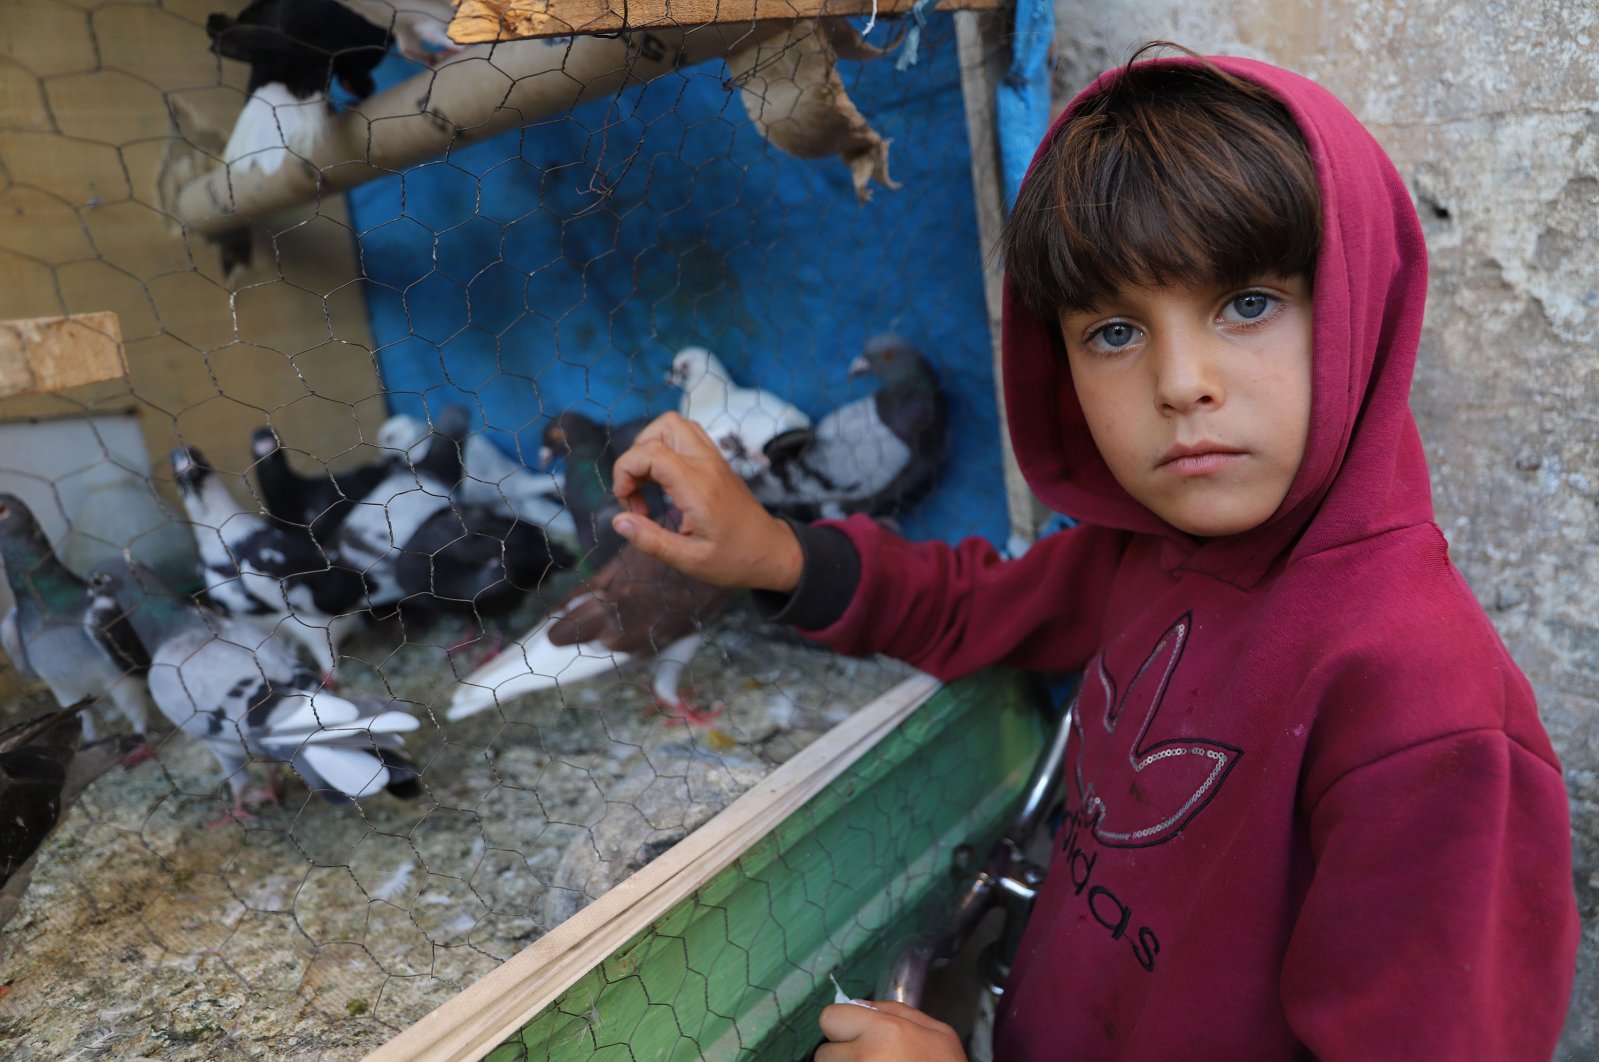 A Syrian boy, who fled his homeland with his family after the civil war erupted, poses by pigeons he feeds in the district of Fatih, Istanbul, Turkey, 2021. (Photo by Shutterstock)
